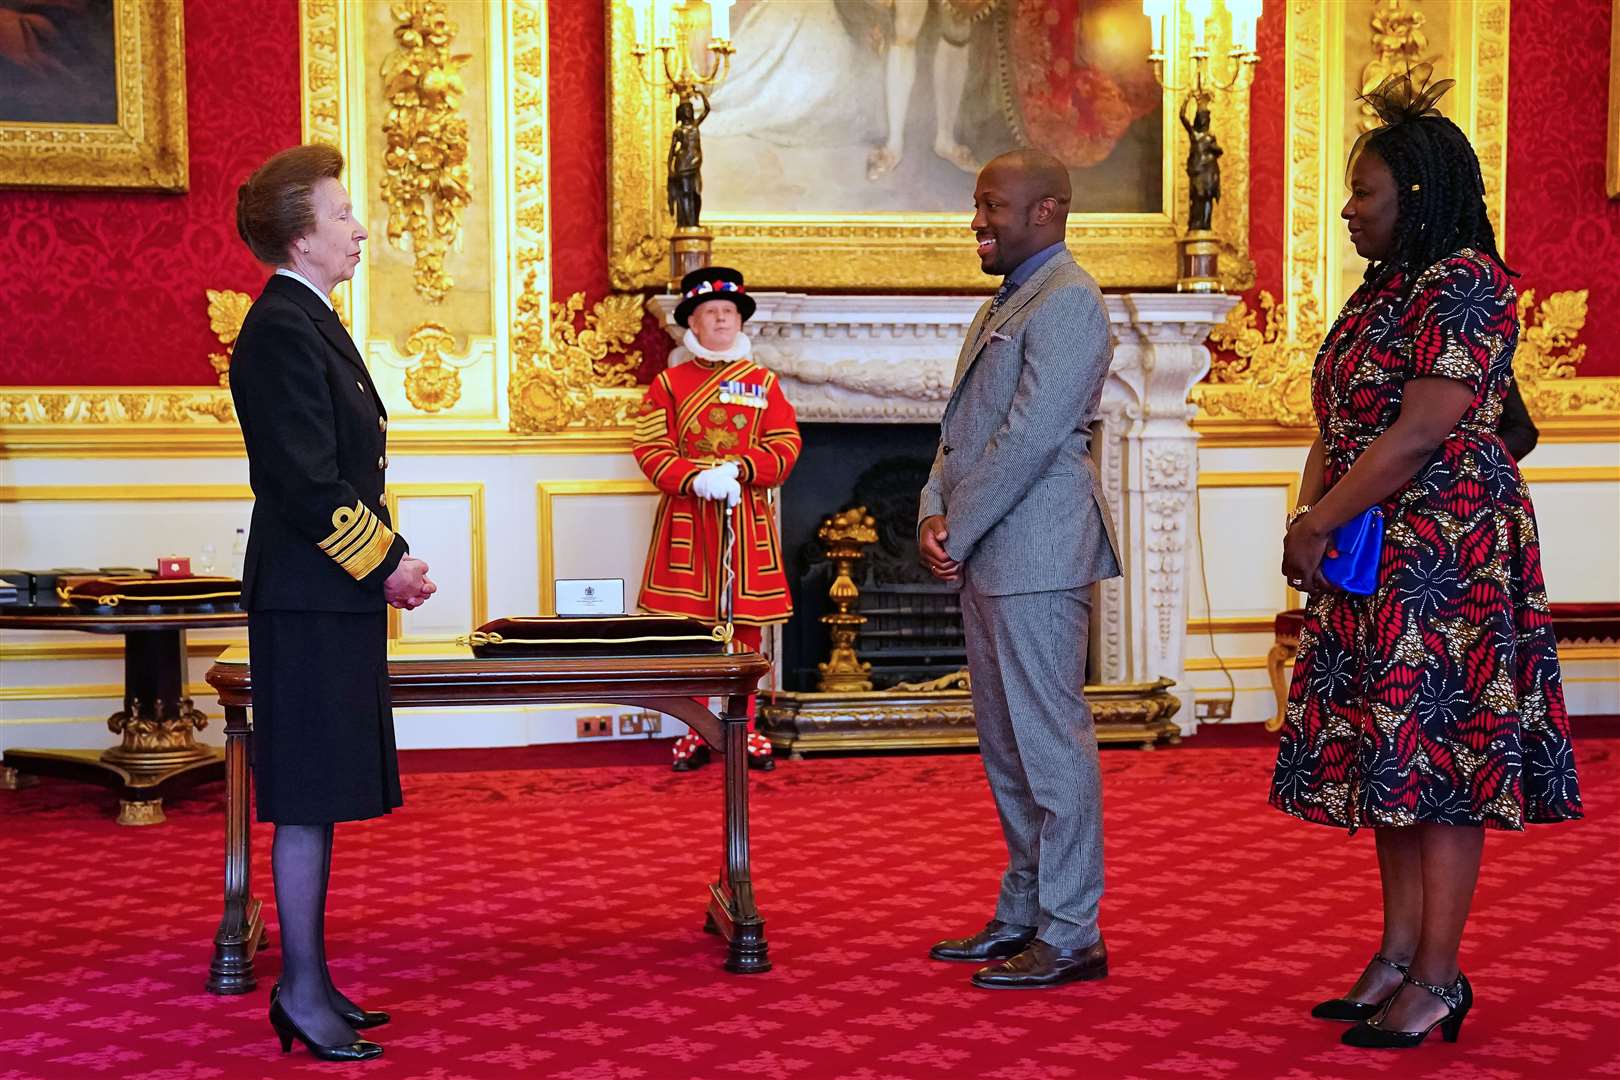 Giles Terera was awarded his medal by the Princess Royal during a ceremony at St James’s Palace (Aaron Chown/PA)